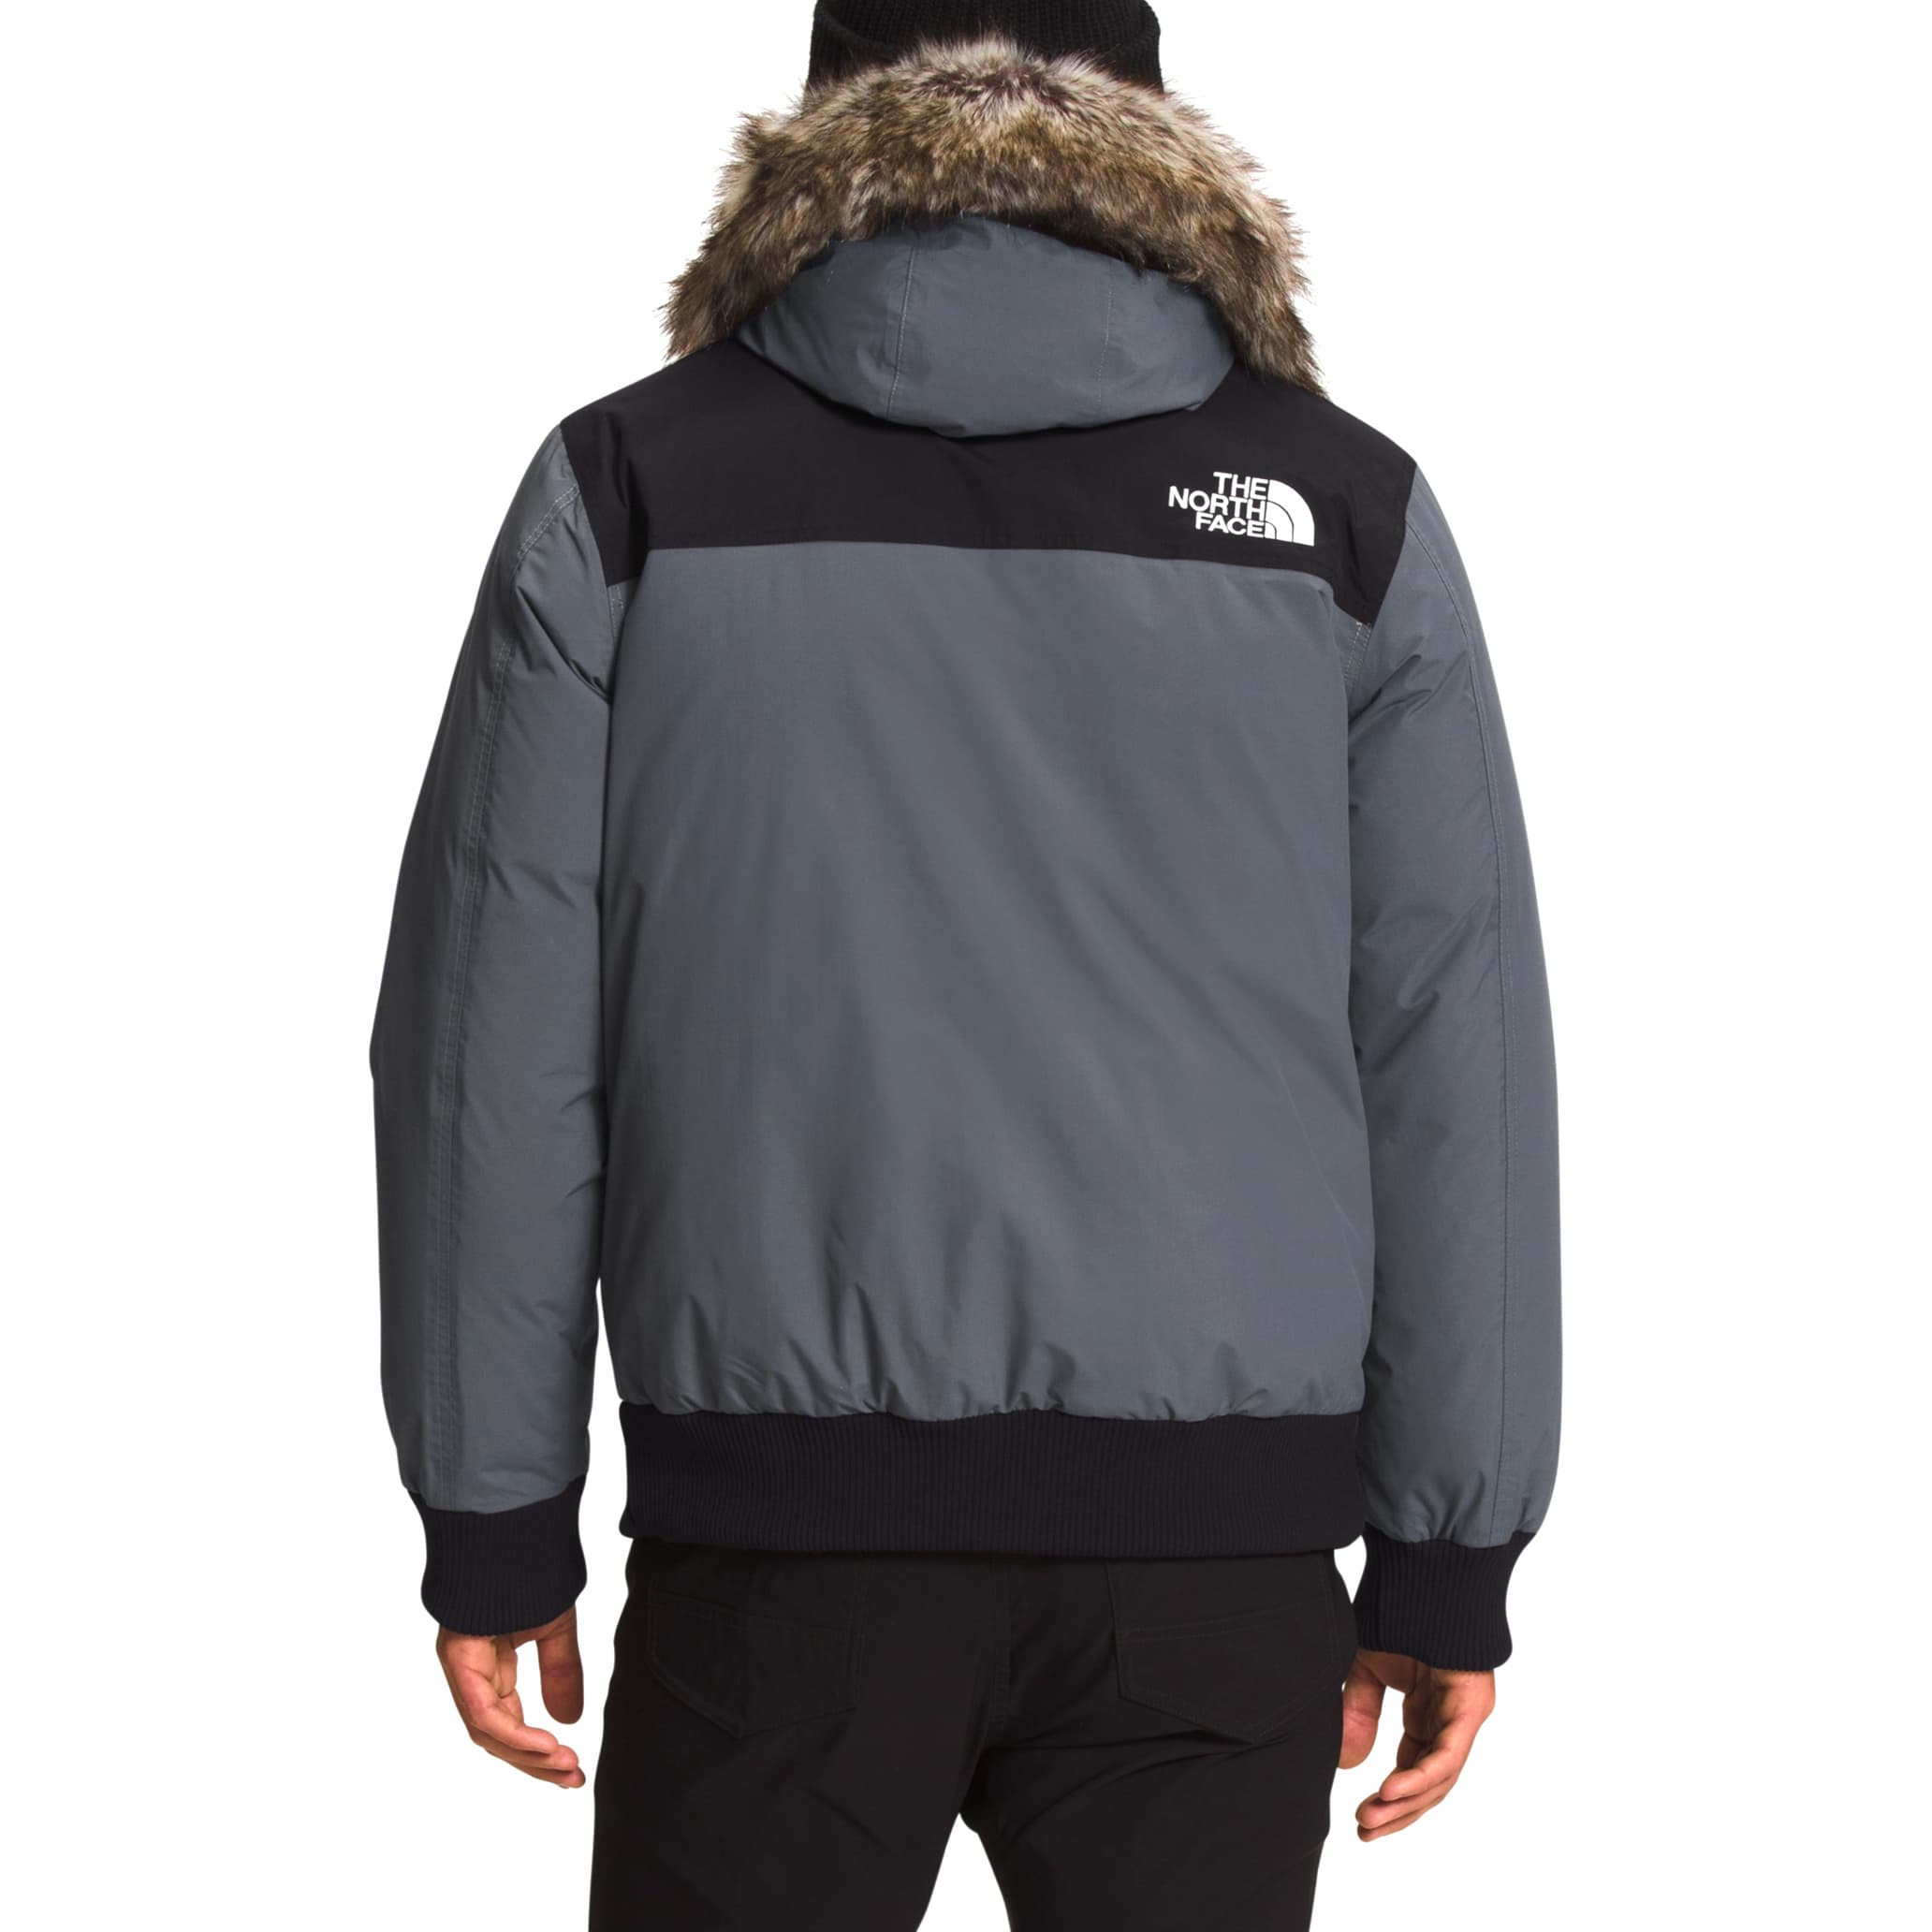 The North Face® Men’s McMurdo Bomber Jacket